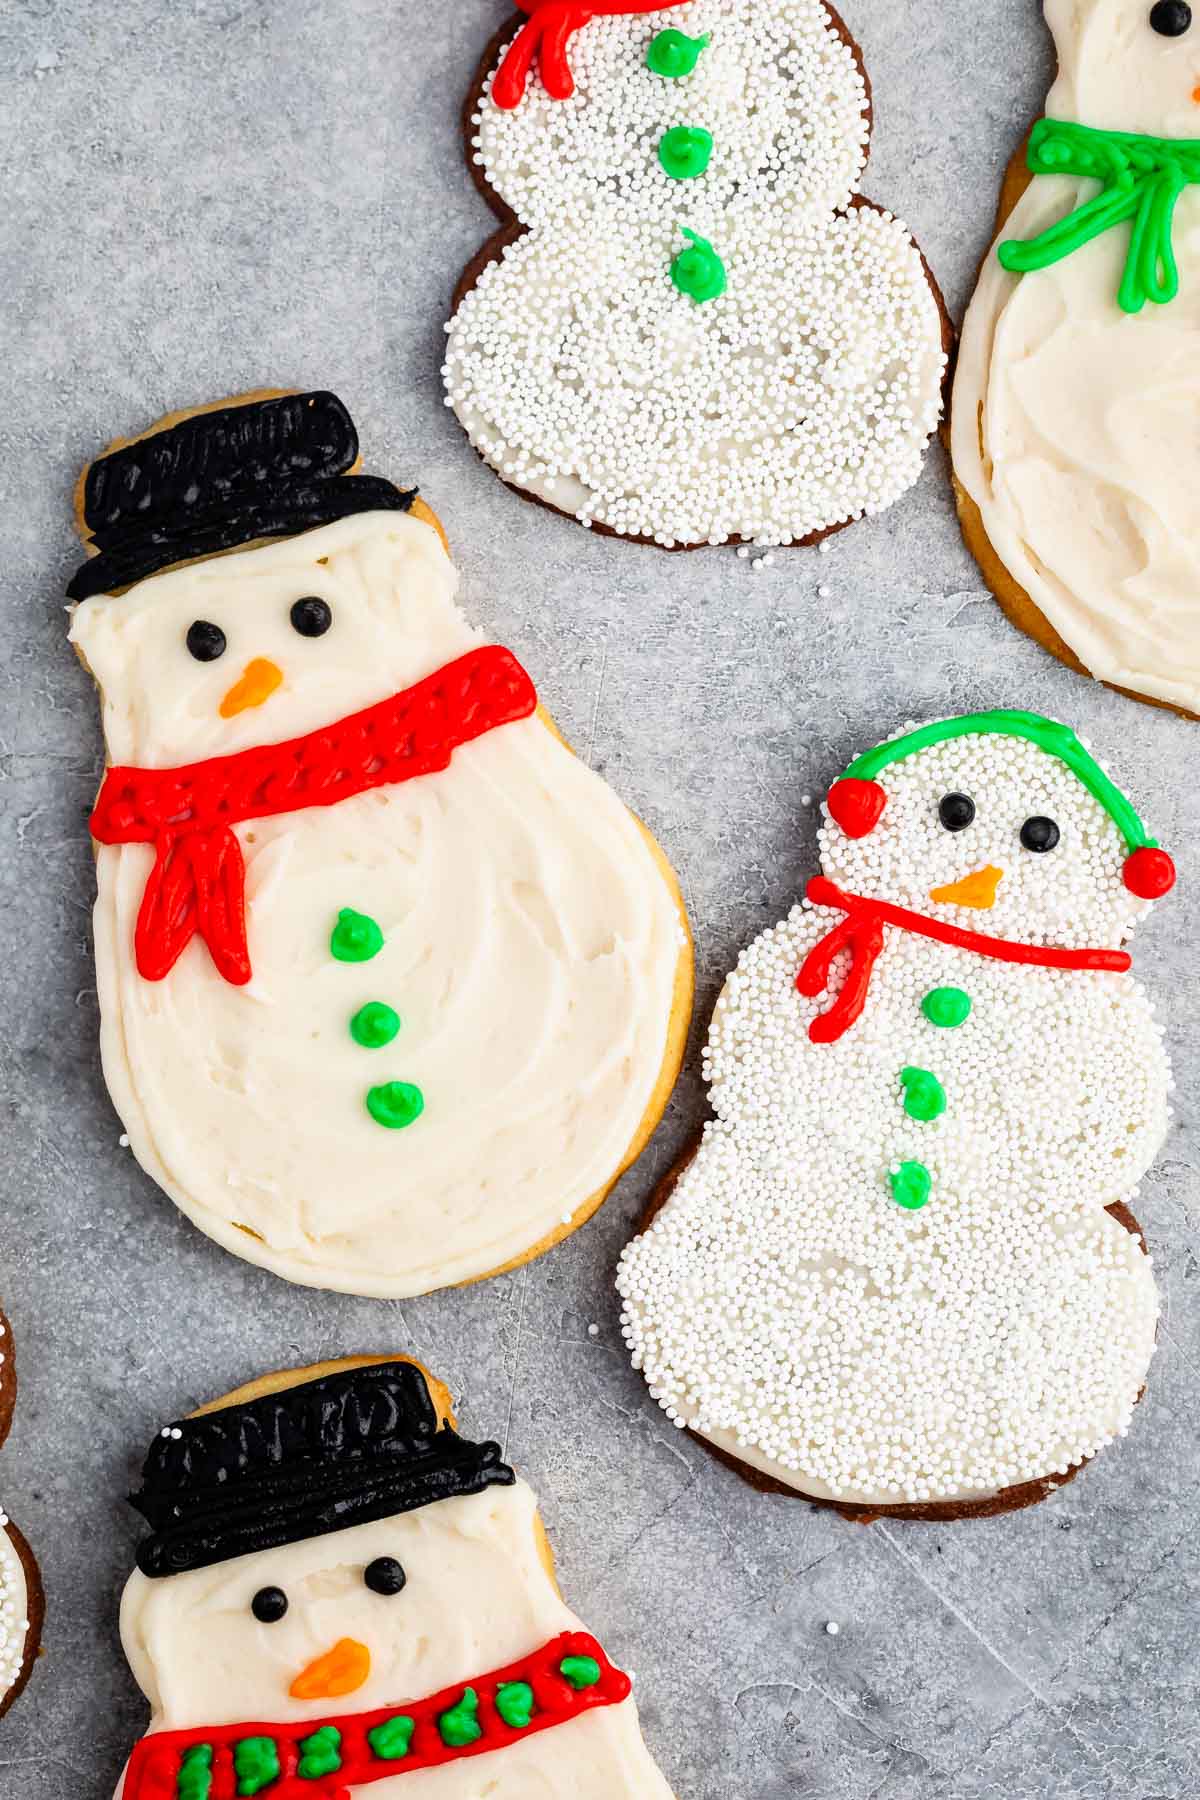 snowman cookies covered in white frosting and sprinkles and icing to replicate a snowman.